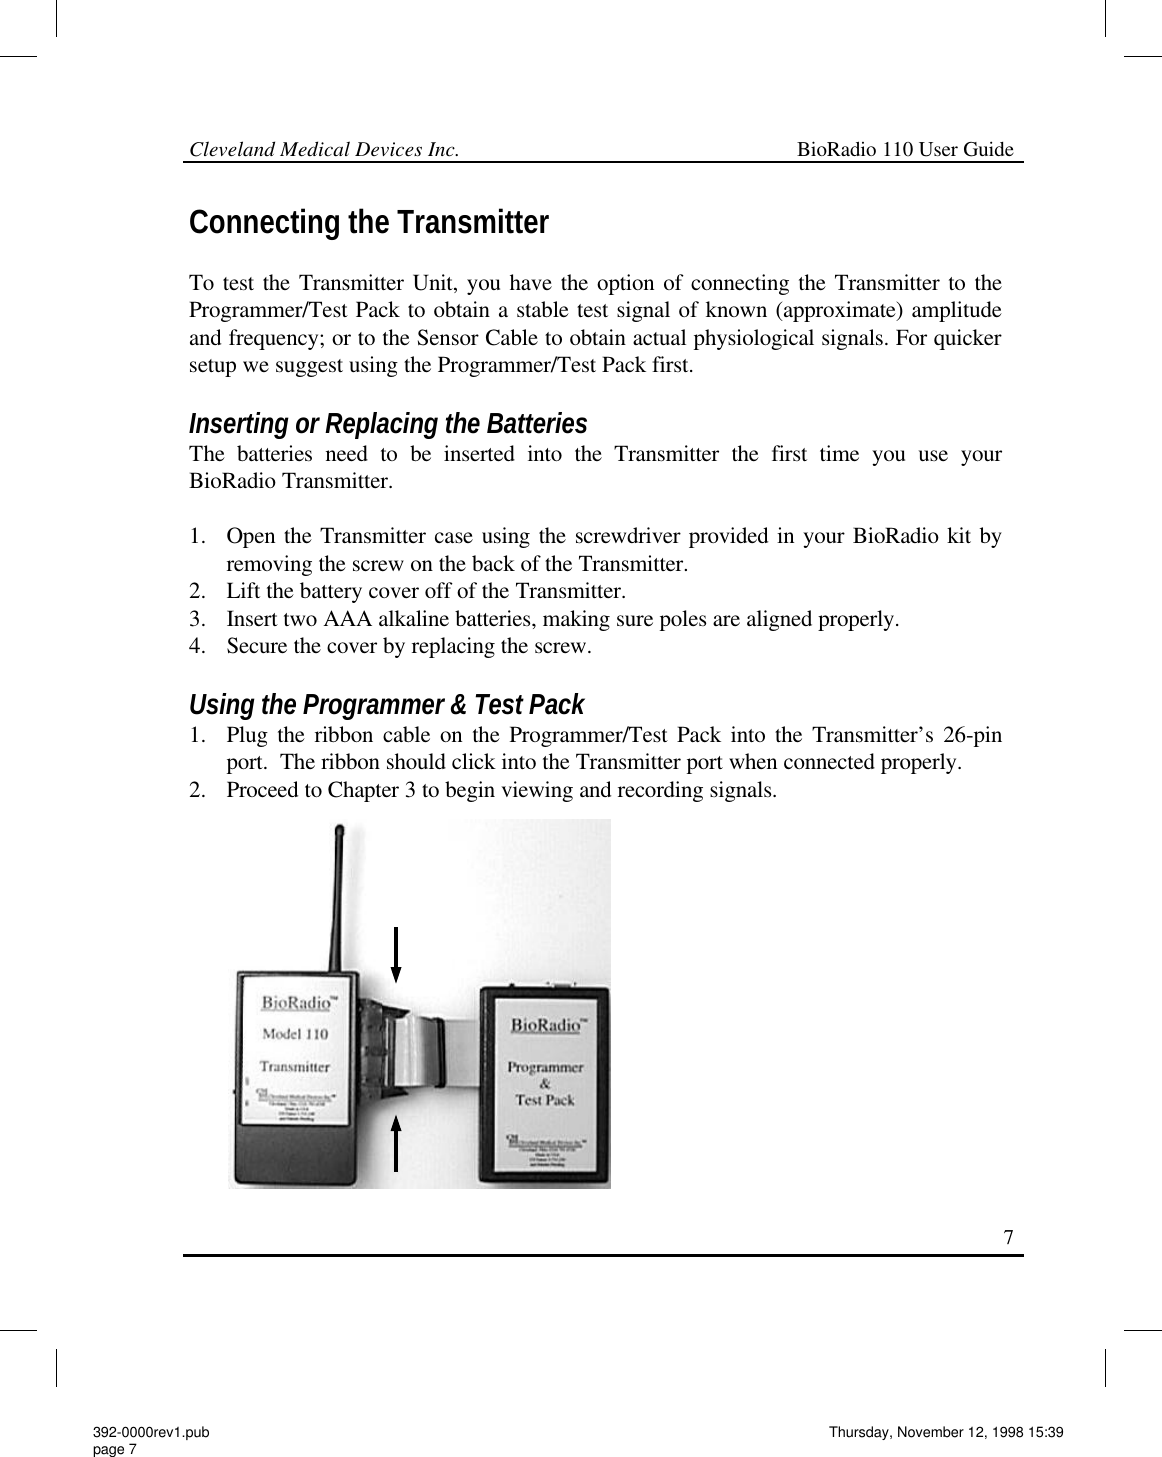 Cleveland Medical Devices Inc.                                                             BioRadio 110 User Guide                                                                                                                                                     7 Connecting the Transmitter  To test the Transmitter Unit, you have the option of connecting the Transmitter to the Programmer/Test Pack to obtain a stable test signal of known (approximate) amplitude and frequency; or to the Sensor Cable to obtain actual physiological signals. For quicker setup we suggest using the Programmer/Test Pack first.  Inserting or Replacing the Batteries The batteries need to be inserted into the Transmitter the first time you use your BioRadio Transmitter.  1. Open the Transmitter case using the screwdriver provided in your BioRadio kit by removing the screw on the back of the Transmitter. 2. Lift the battery cover off of the Transmitter. 3. Insert two AAA alkaline batteries, making sure poles are aligned properly. 4. Secure the cover by replacing the screw.  Using the Programmer &amp; Test Pack 1. Plug the ribbon cable on the Programmer/Test Pack into the Transmitter’s 26-pin port.  The ribbon should click into the Transmitter port when connected properly. 2. Proceed to Chapter 3 to begin viewing and recording signals. 392-0000rev1.pub page 7 Thursday, November 12, 1998 15:39 